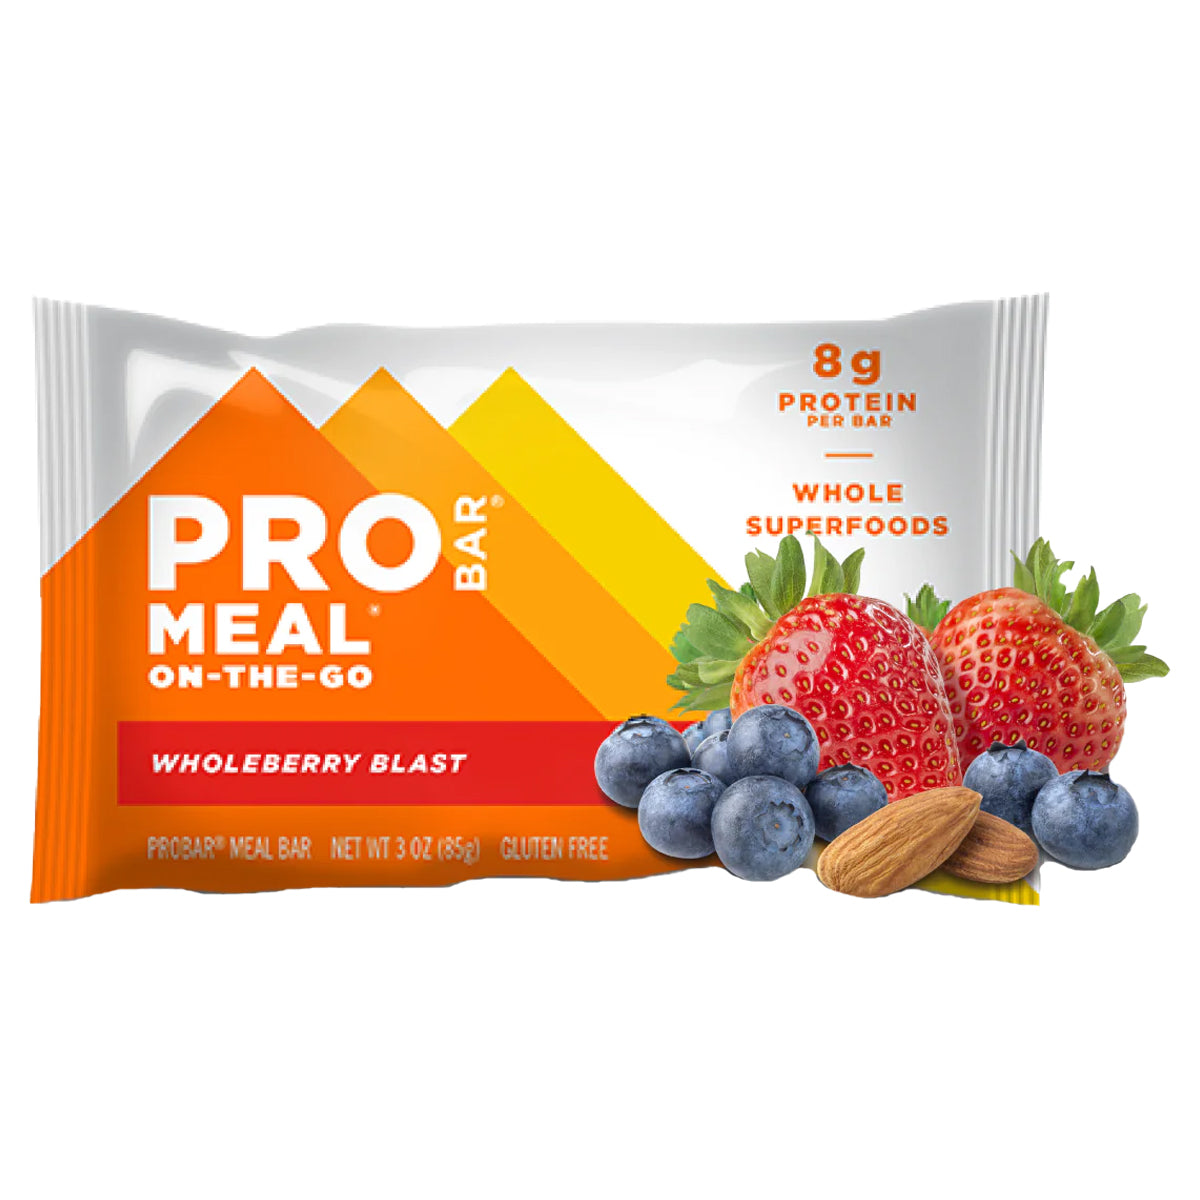 PROBAR Meal Bar in  by GOHUNT | Pro Bar - GOHUNT Shop